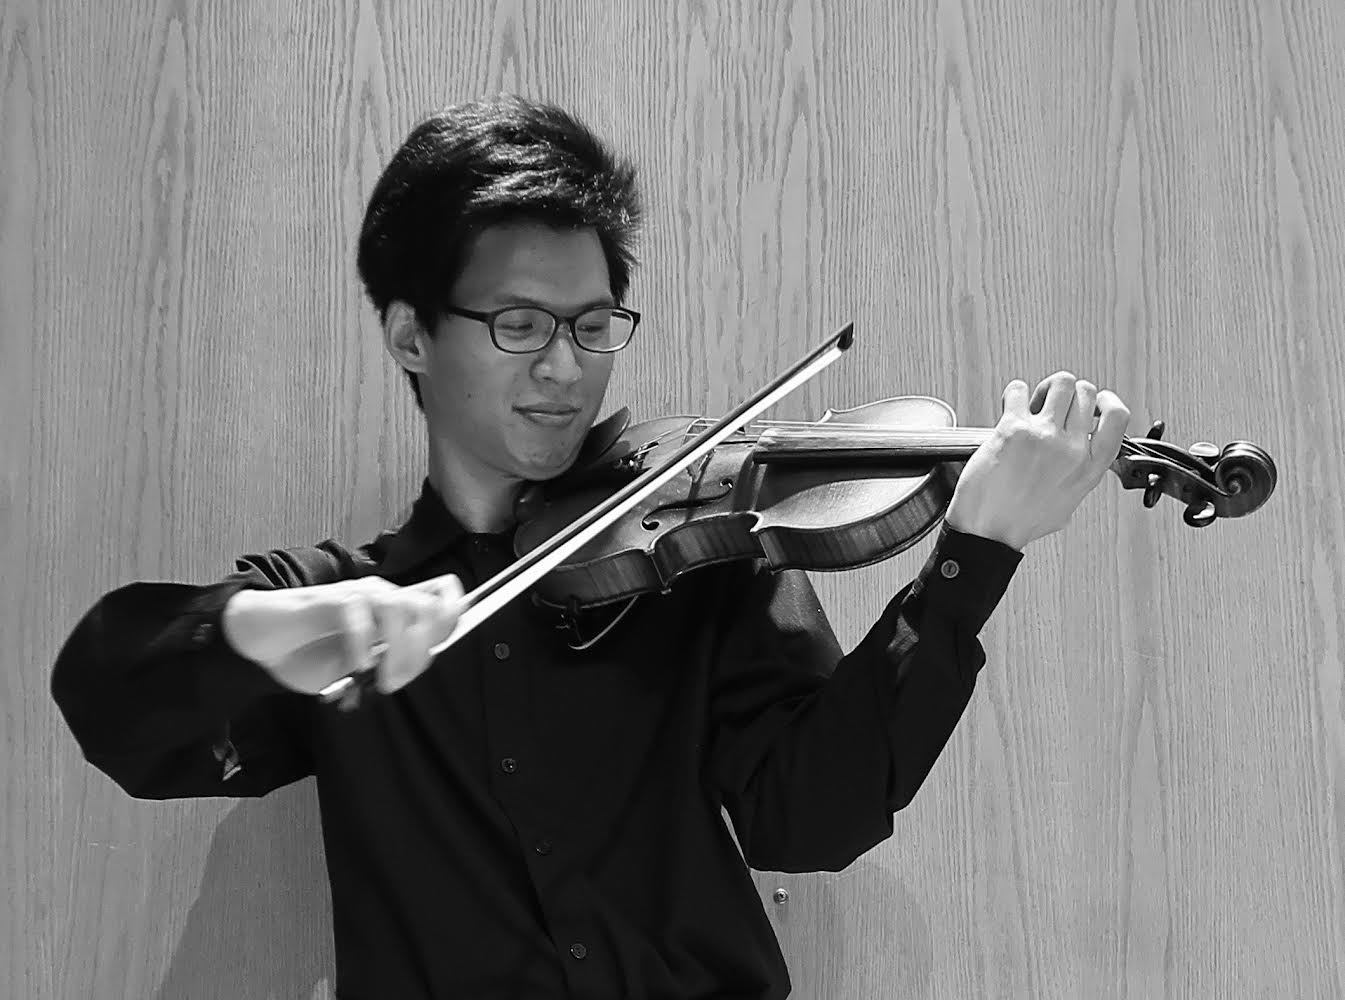 A black and white photo of a young Asian man holding a violin